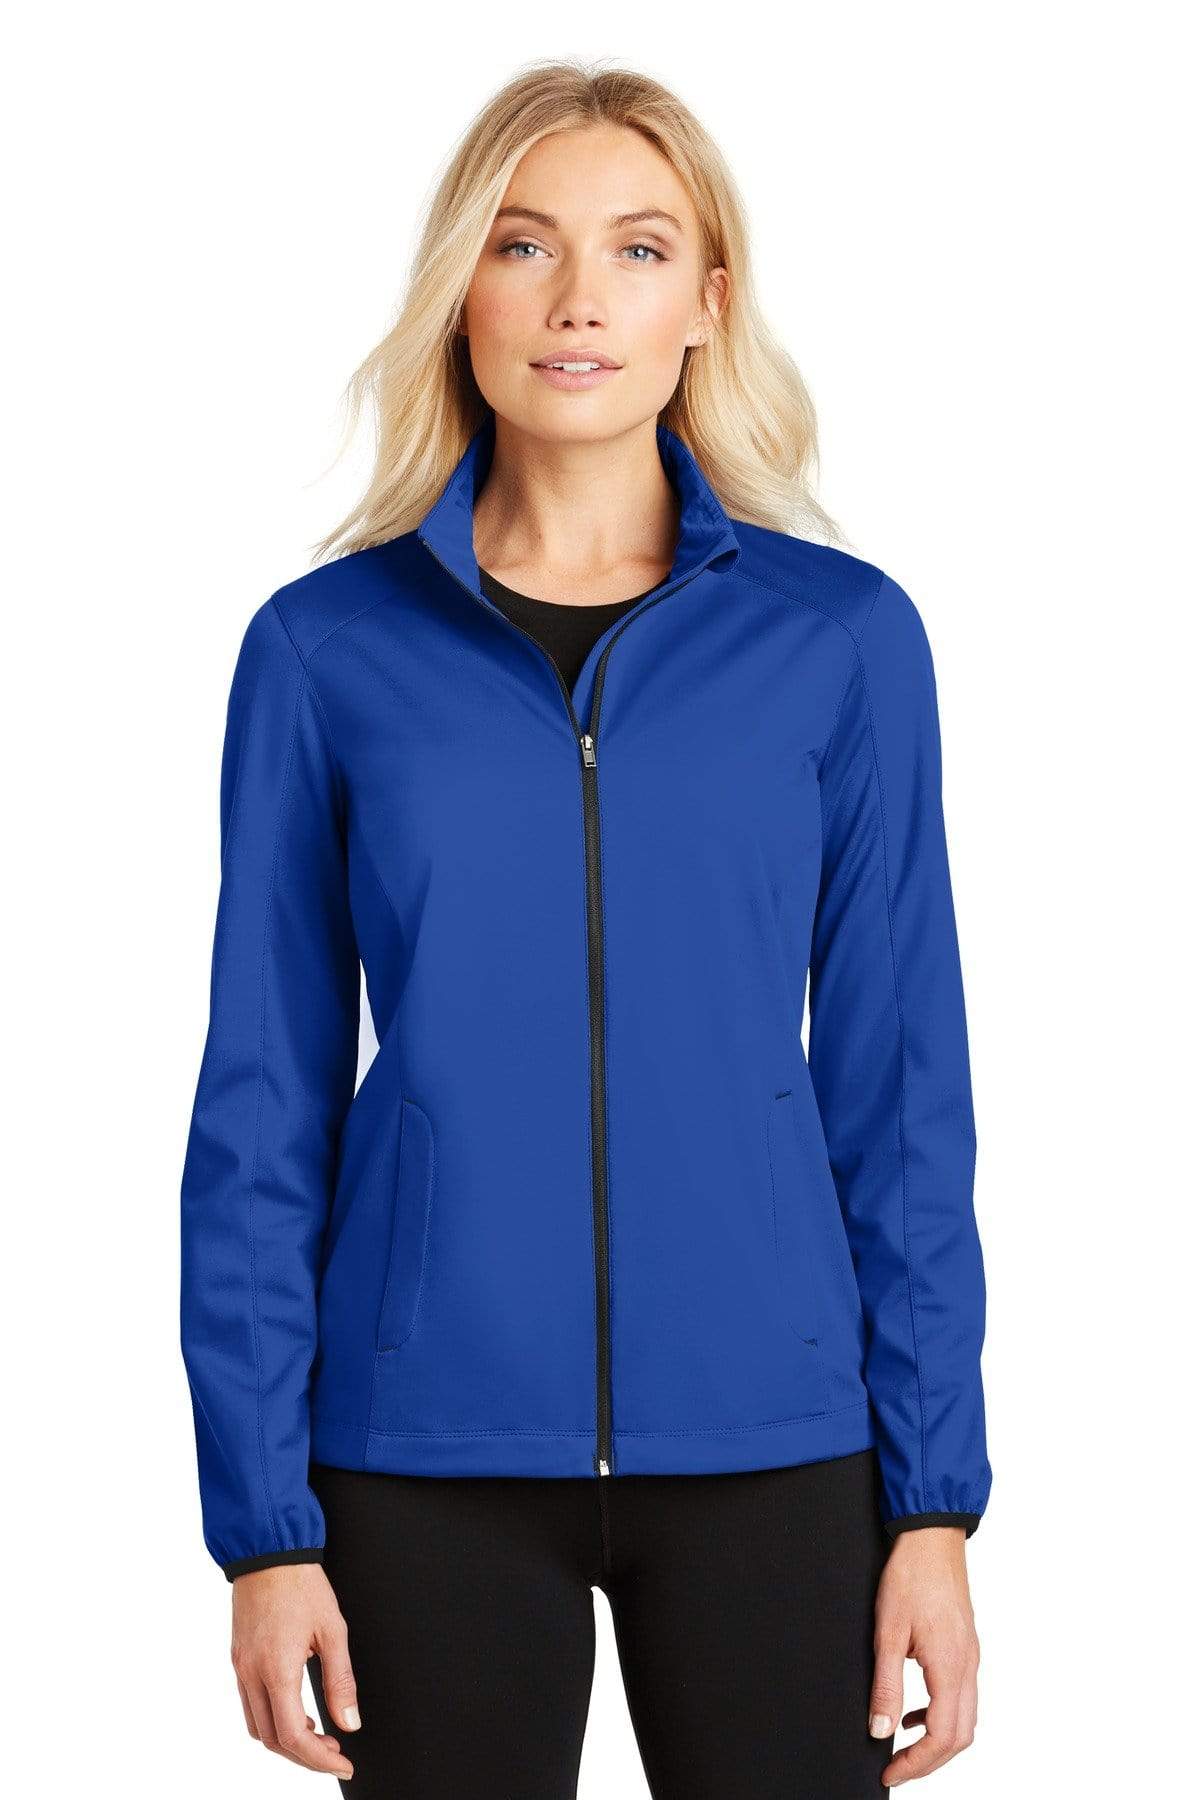 Port Authority Ladies Active Soft Shell Jacket L7176953